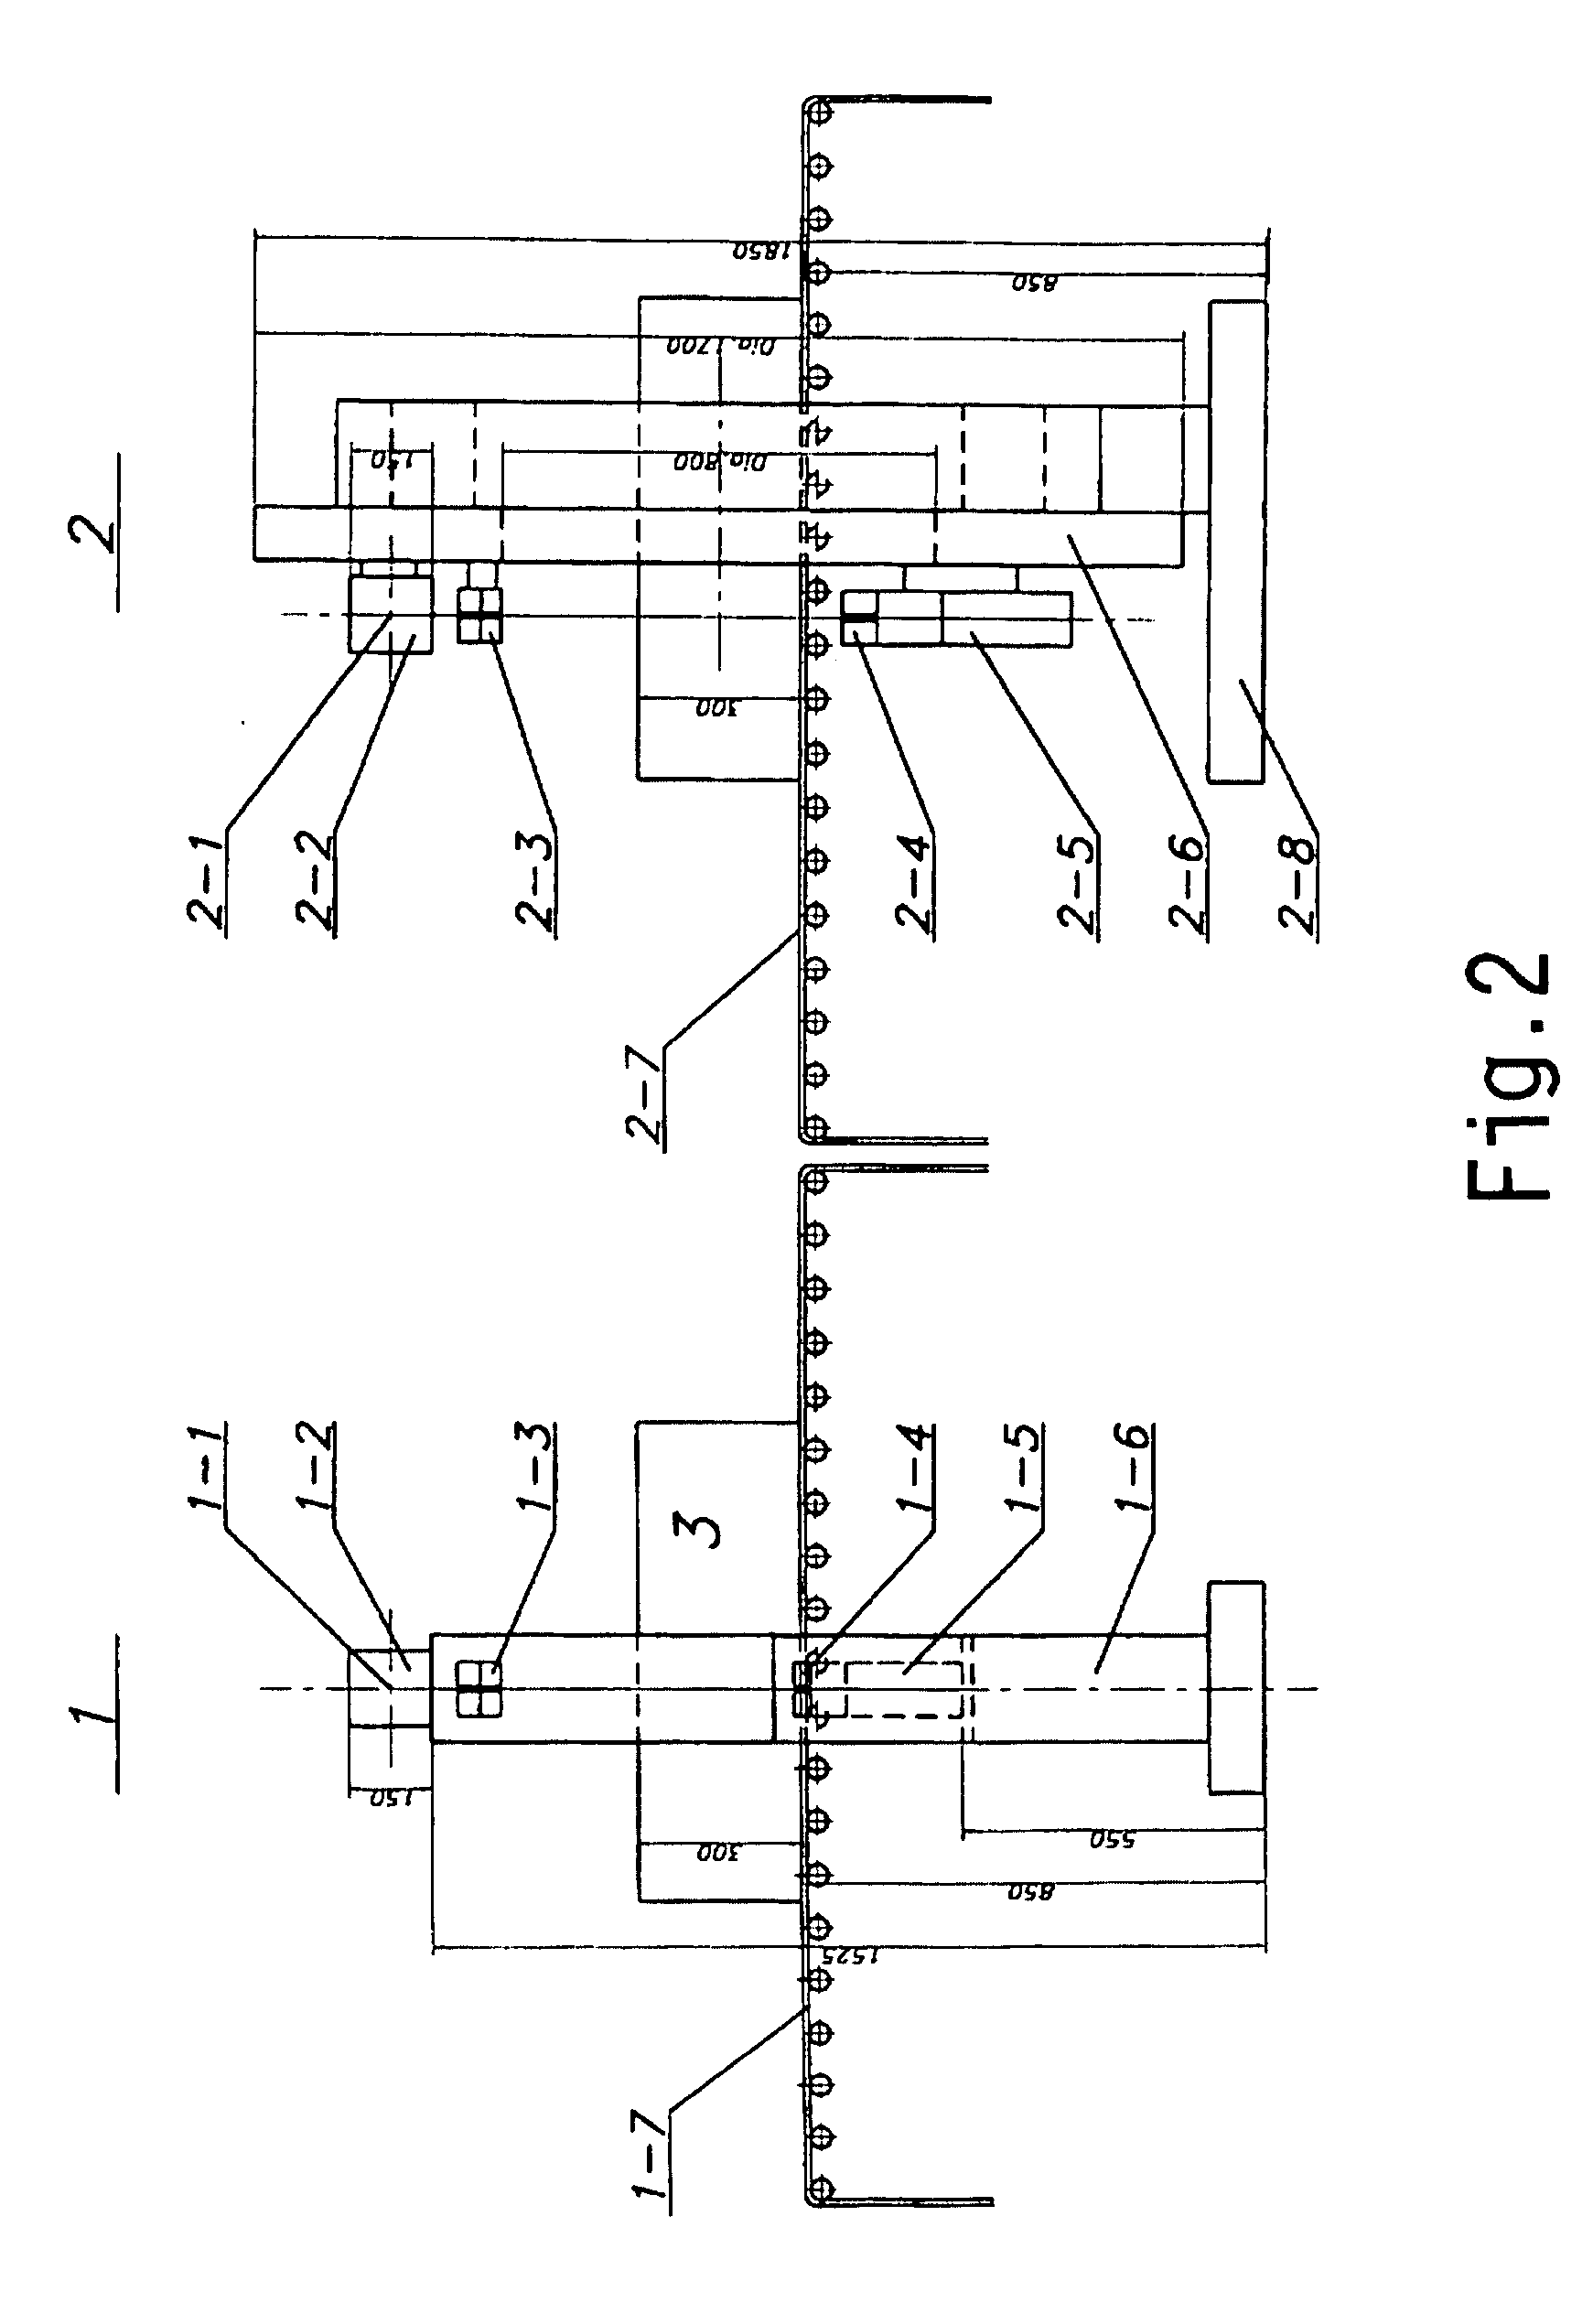 Gamma radiation imaging system for non-destructive inspection of the luggage